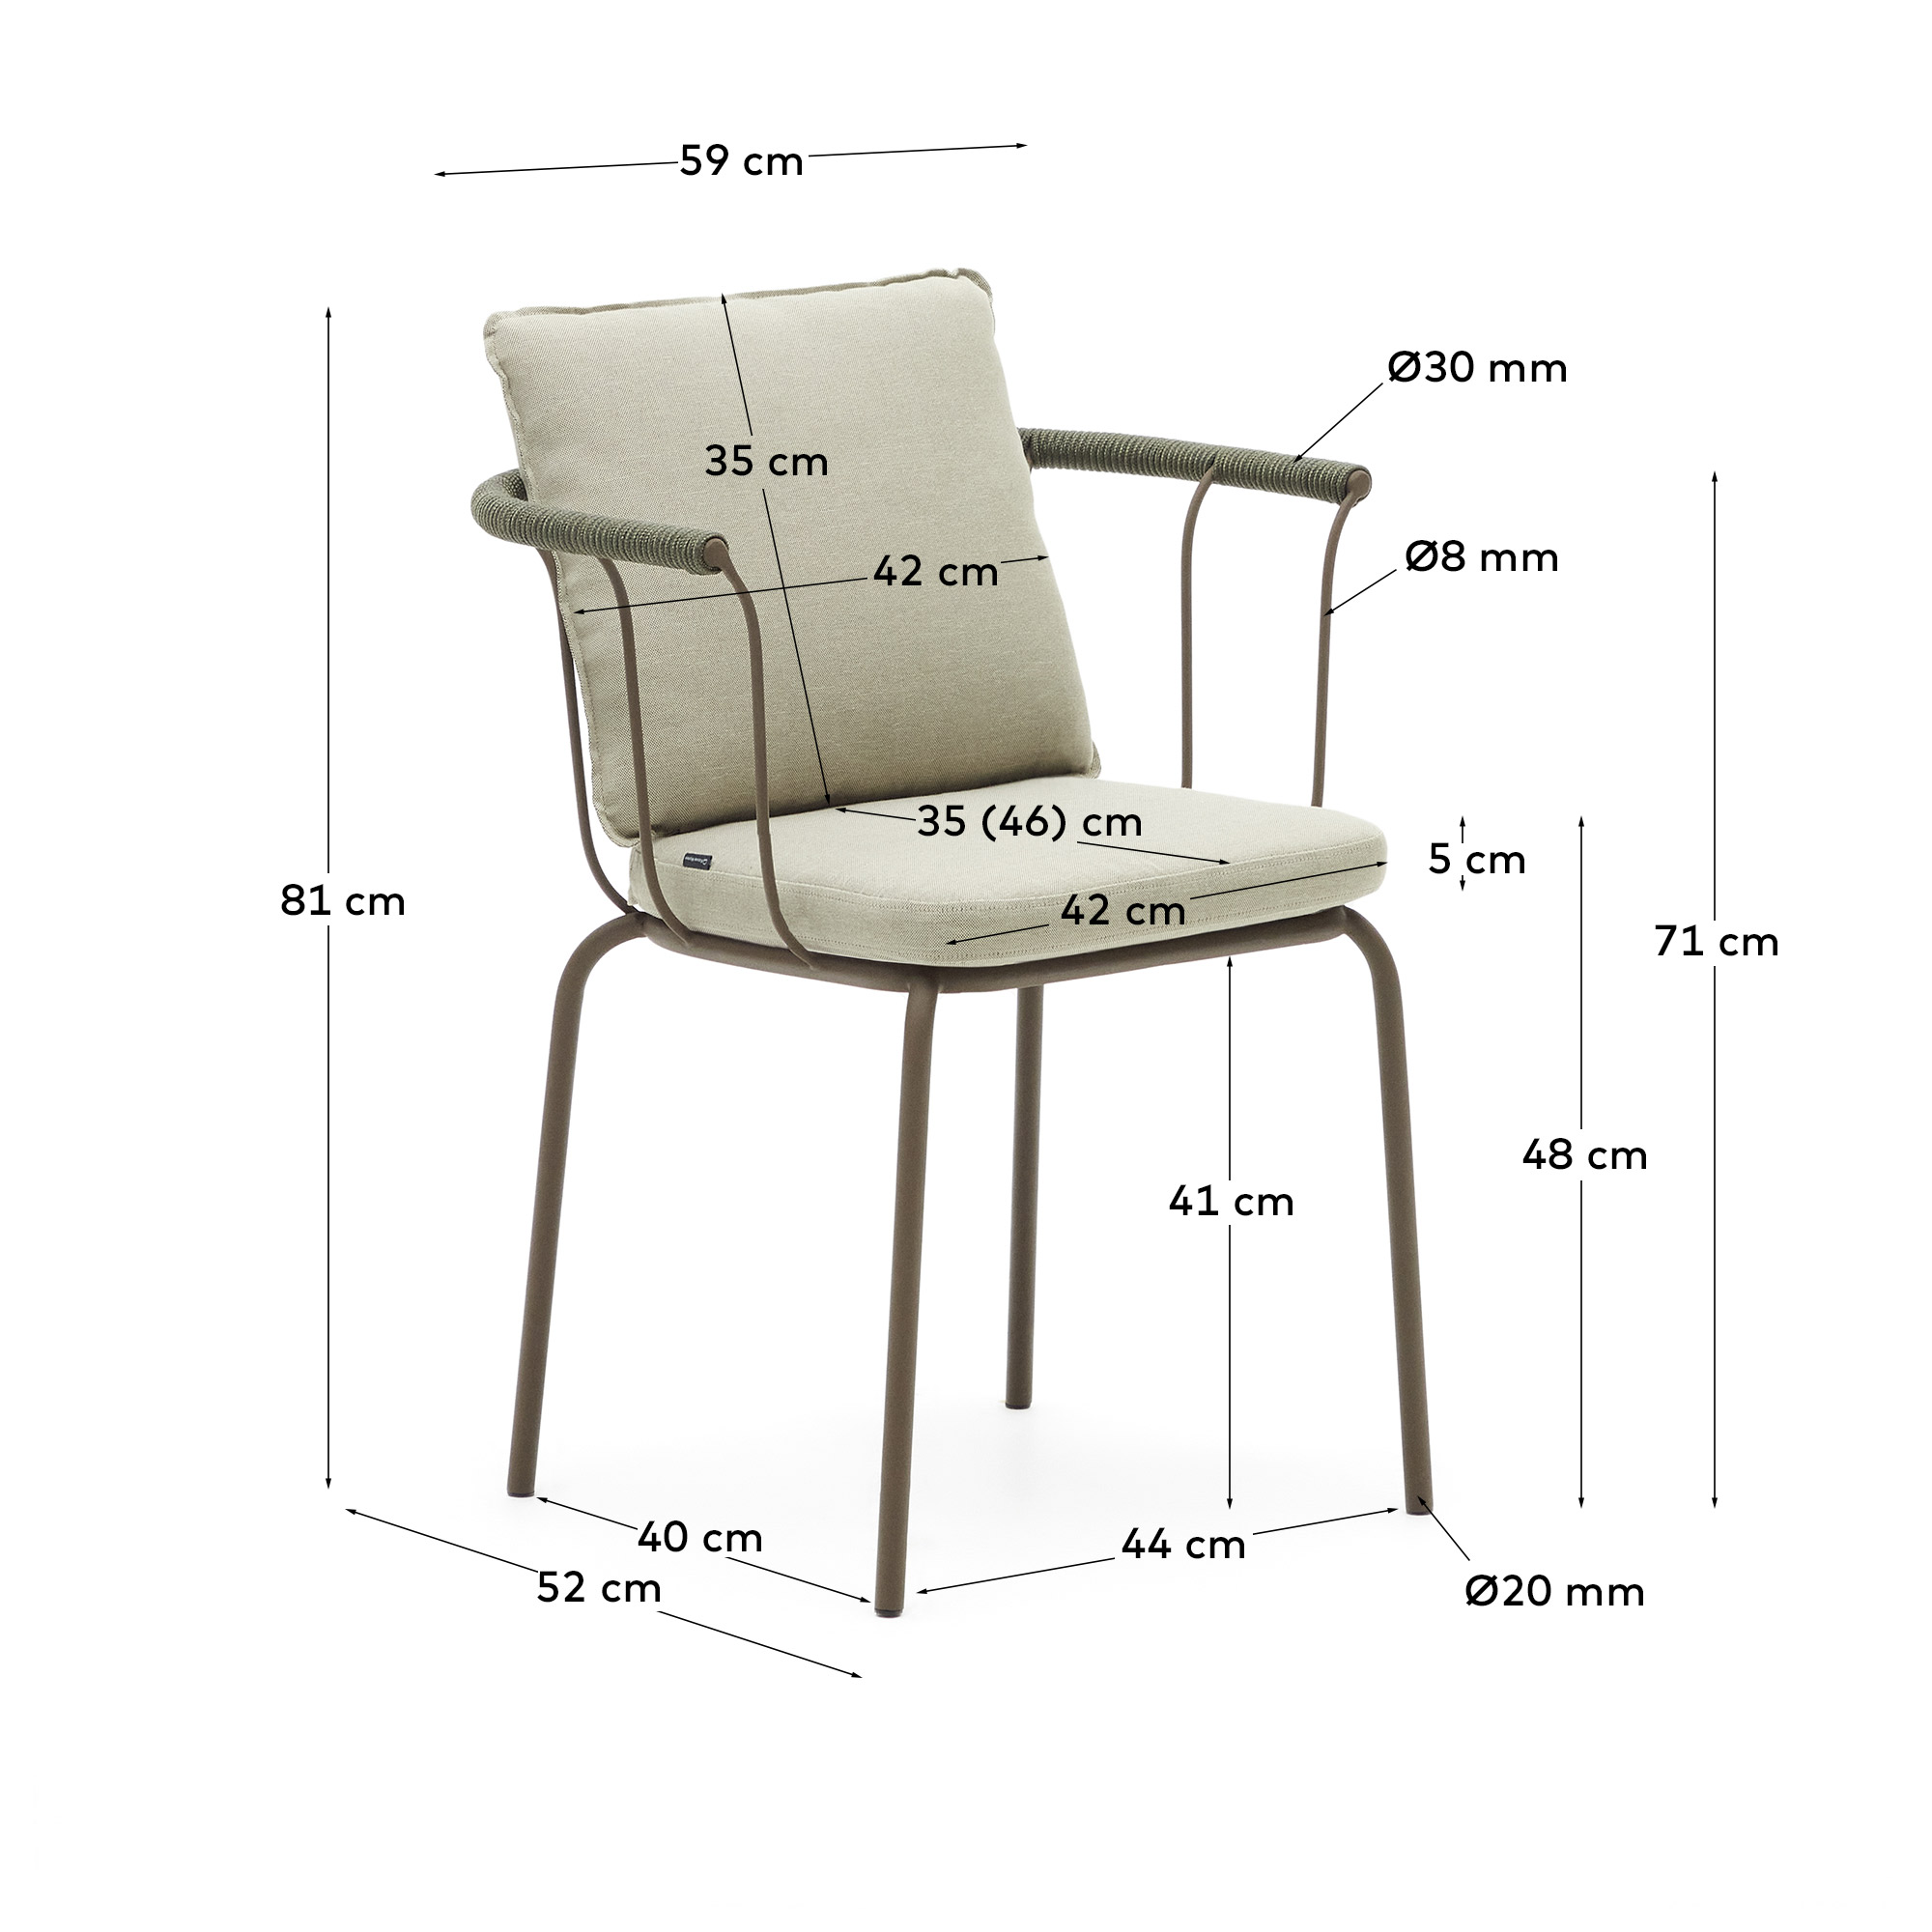 Salguer stackable chair in cord and steel with a brown painted finish - sizes